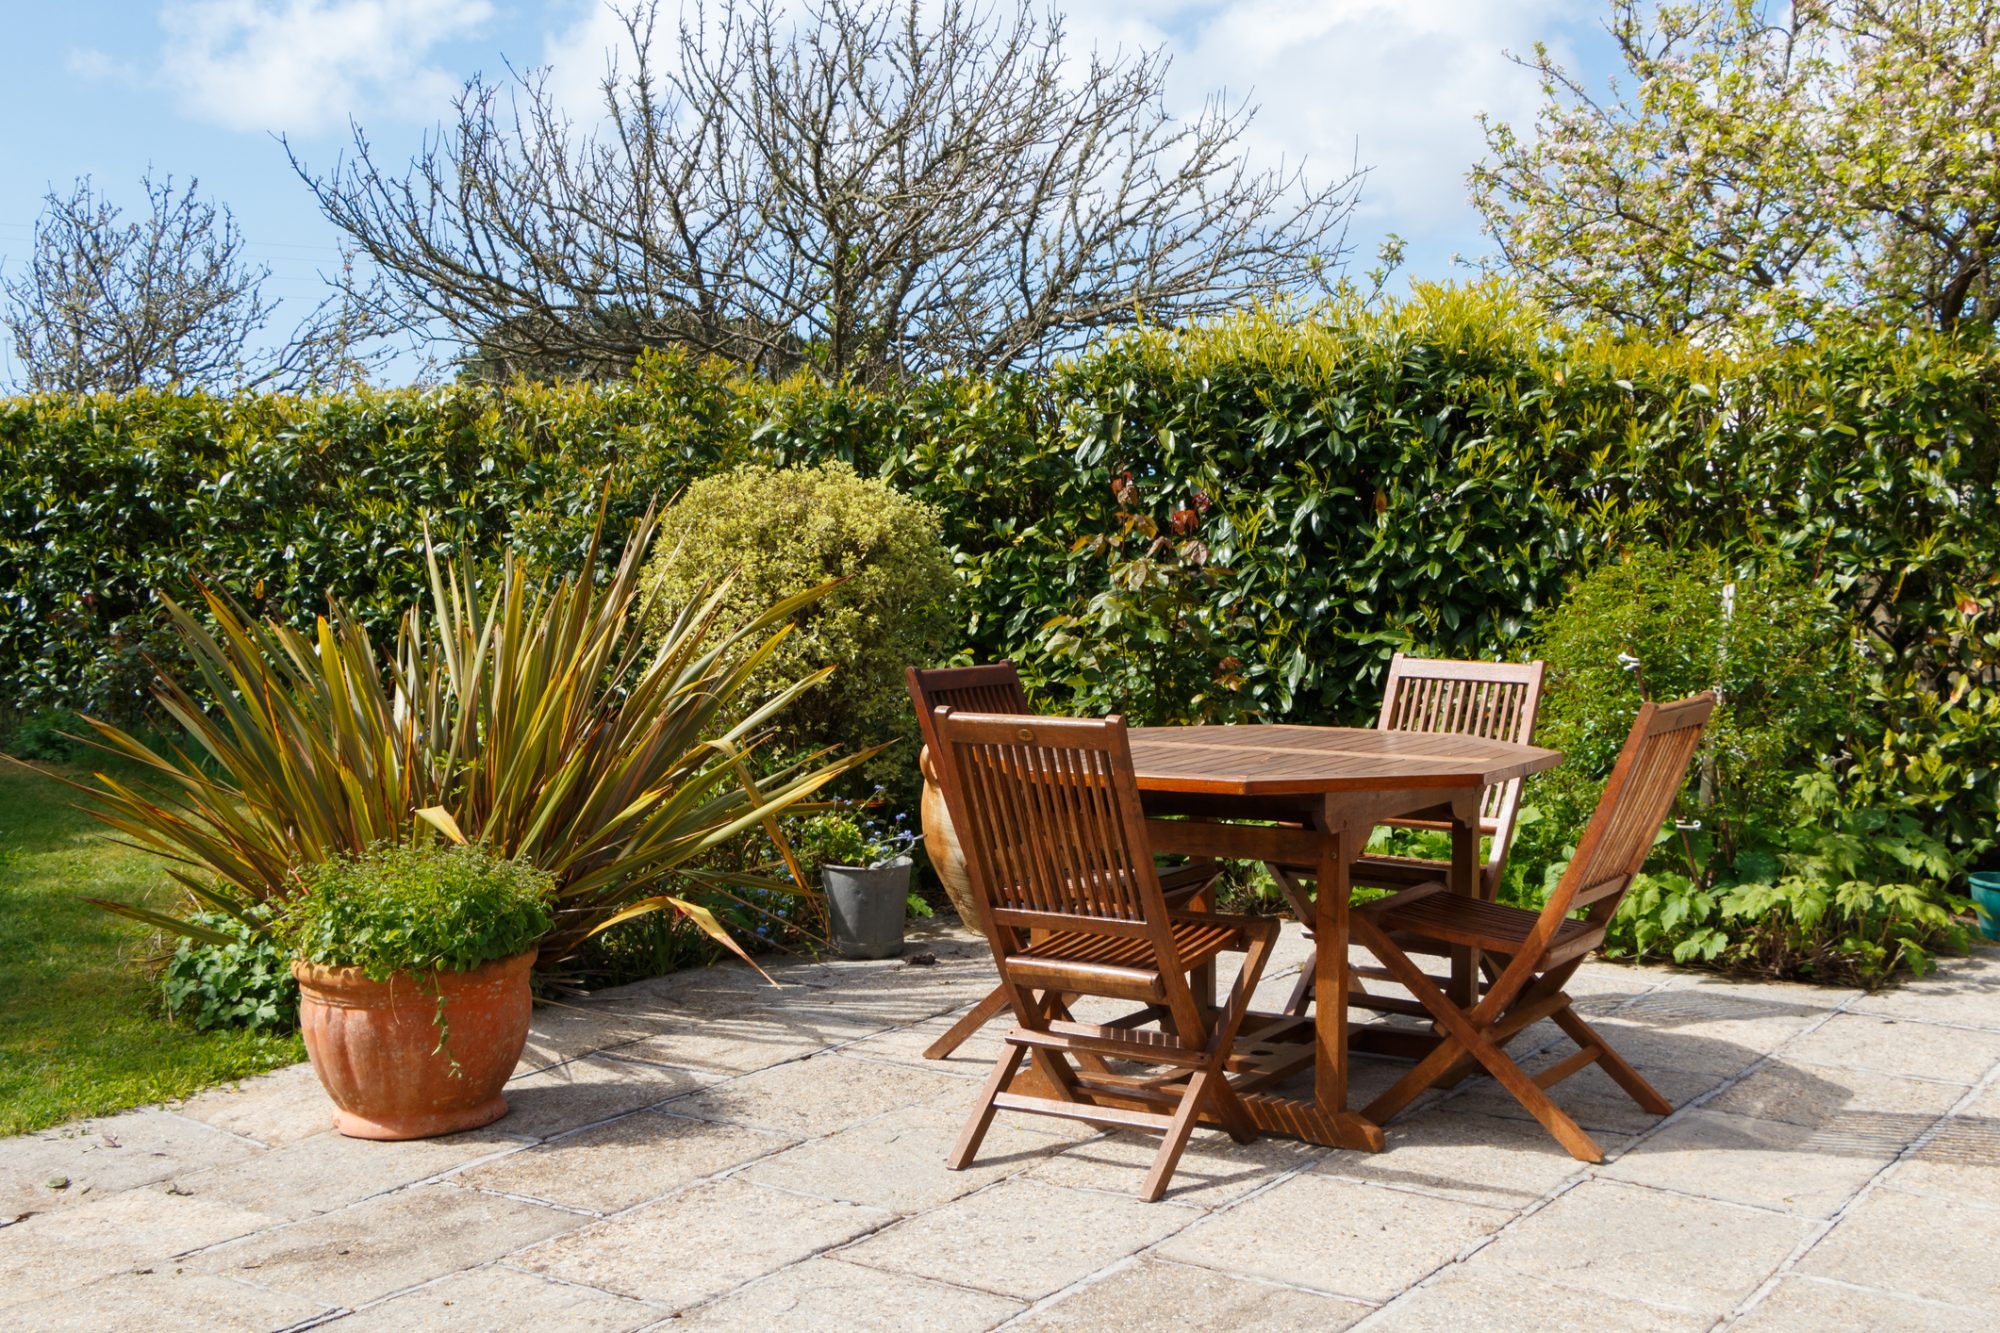 Terrace in pavement and wooden garden furniture in a garden